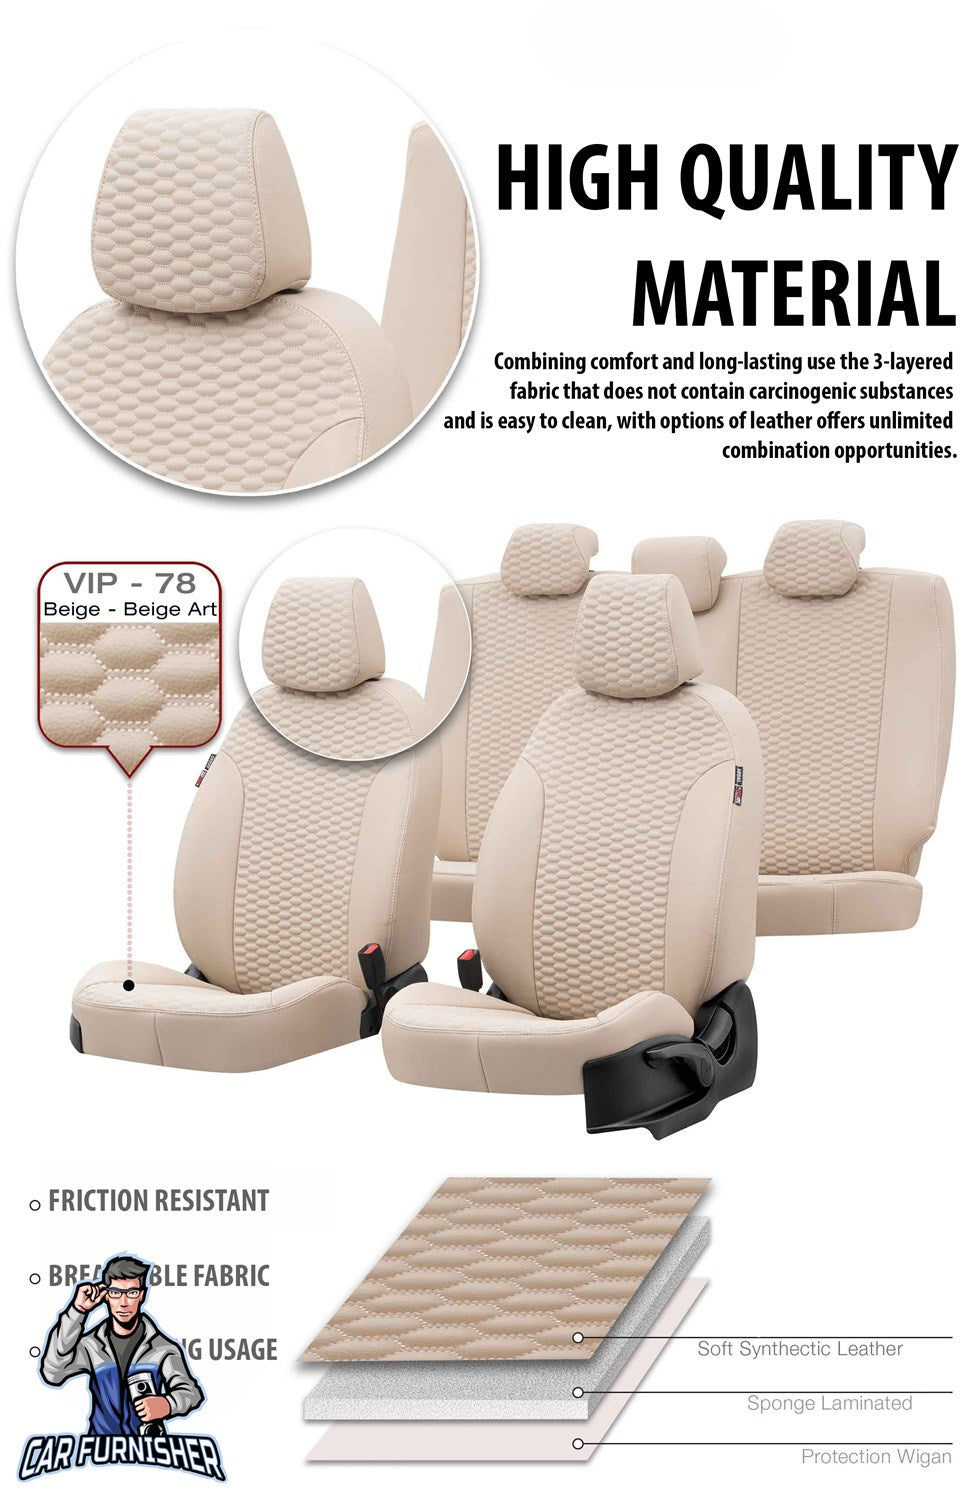 Nissan Skystar Seat Covers Tokyo Leather Design Dark Gray Leather